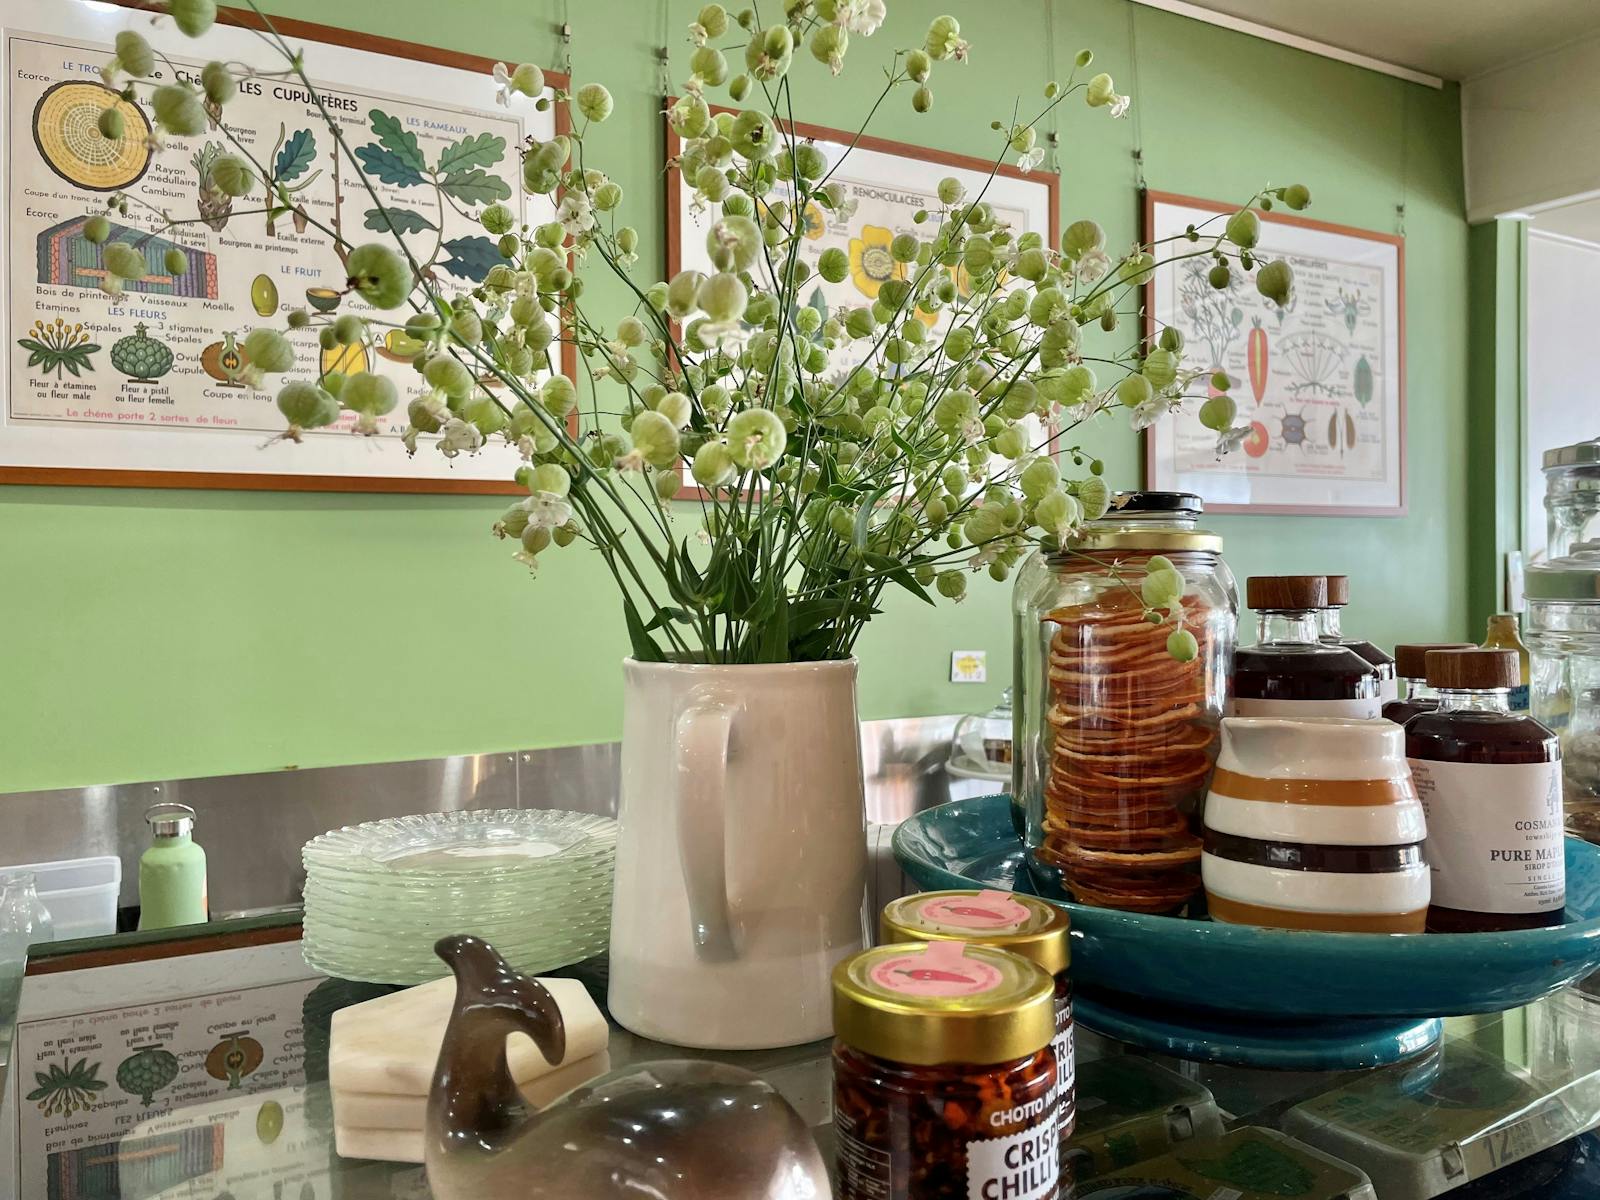 Flowers,maple syrup bottles and chilli jars on counter inside teh cafe